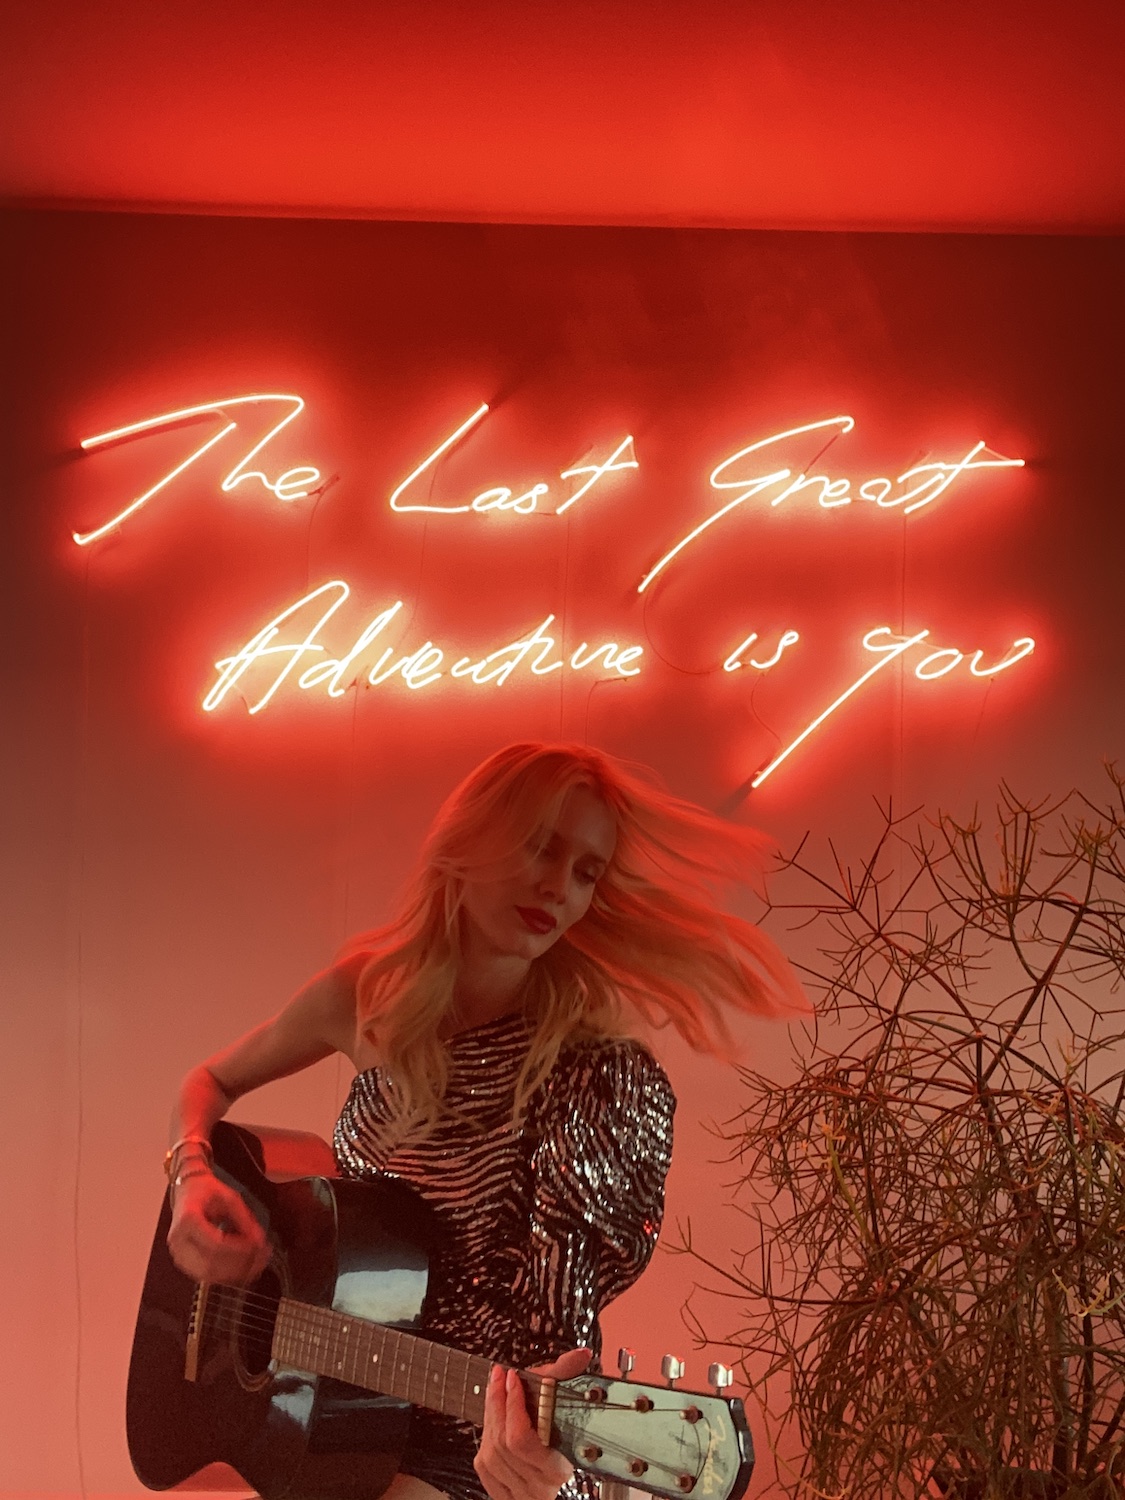 Celesta in front of her very first art piece. Tracey Emin, “The Last Great Adventure is You”, 2014. Courtesy of Celesta Hodge. 